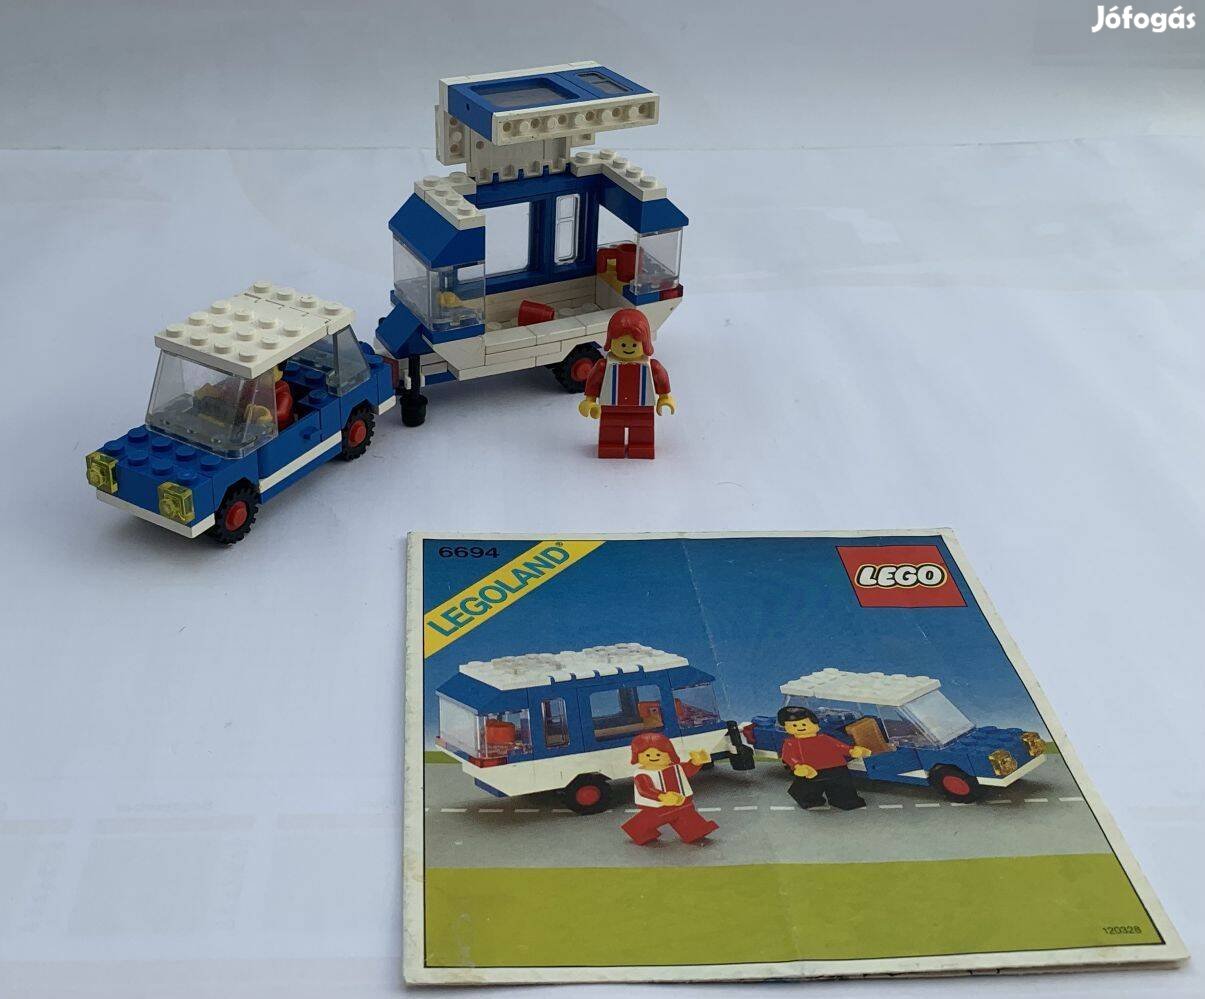 Lego City 6694 - Car with Camper